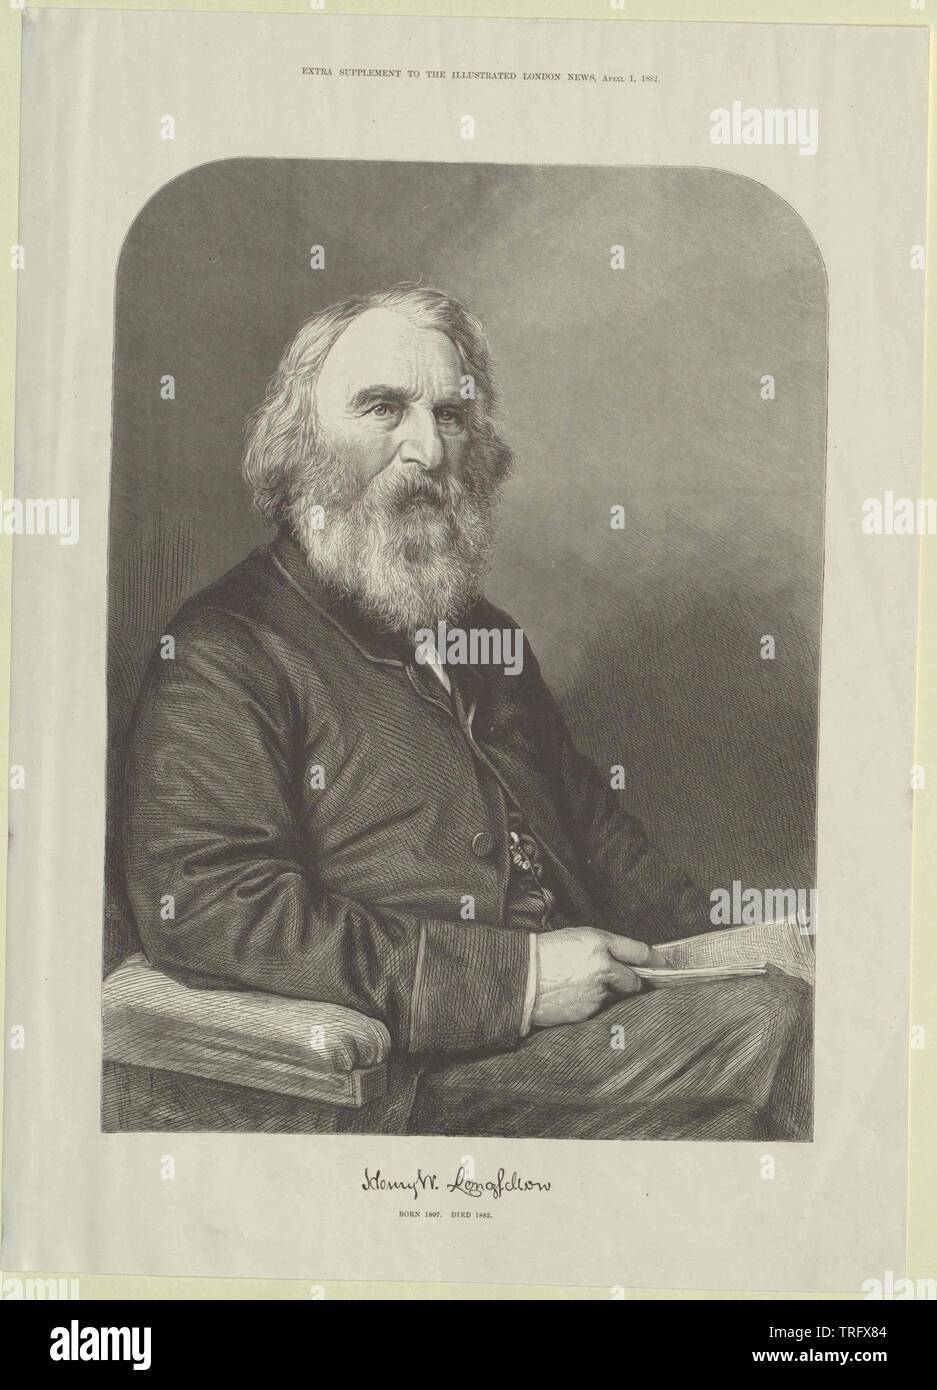 Longfellow, Henry Wadsworth, Additional-Rights - Clearance-Info - Not-Available Stockfoto